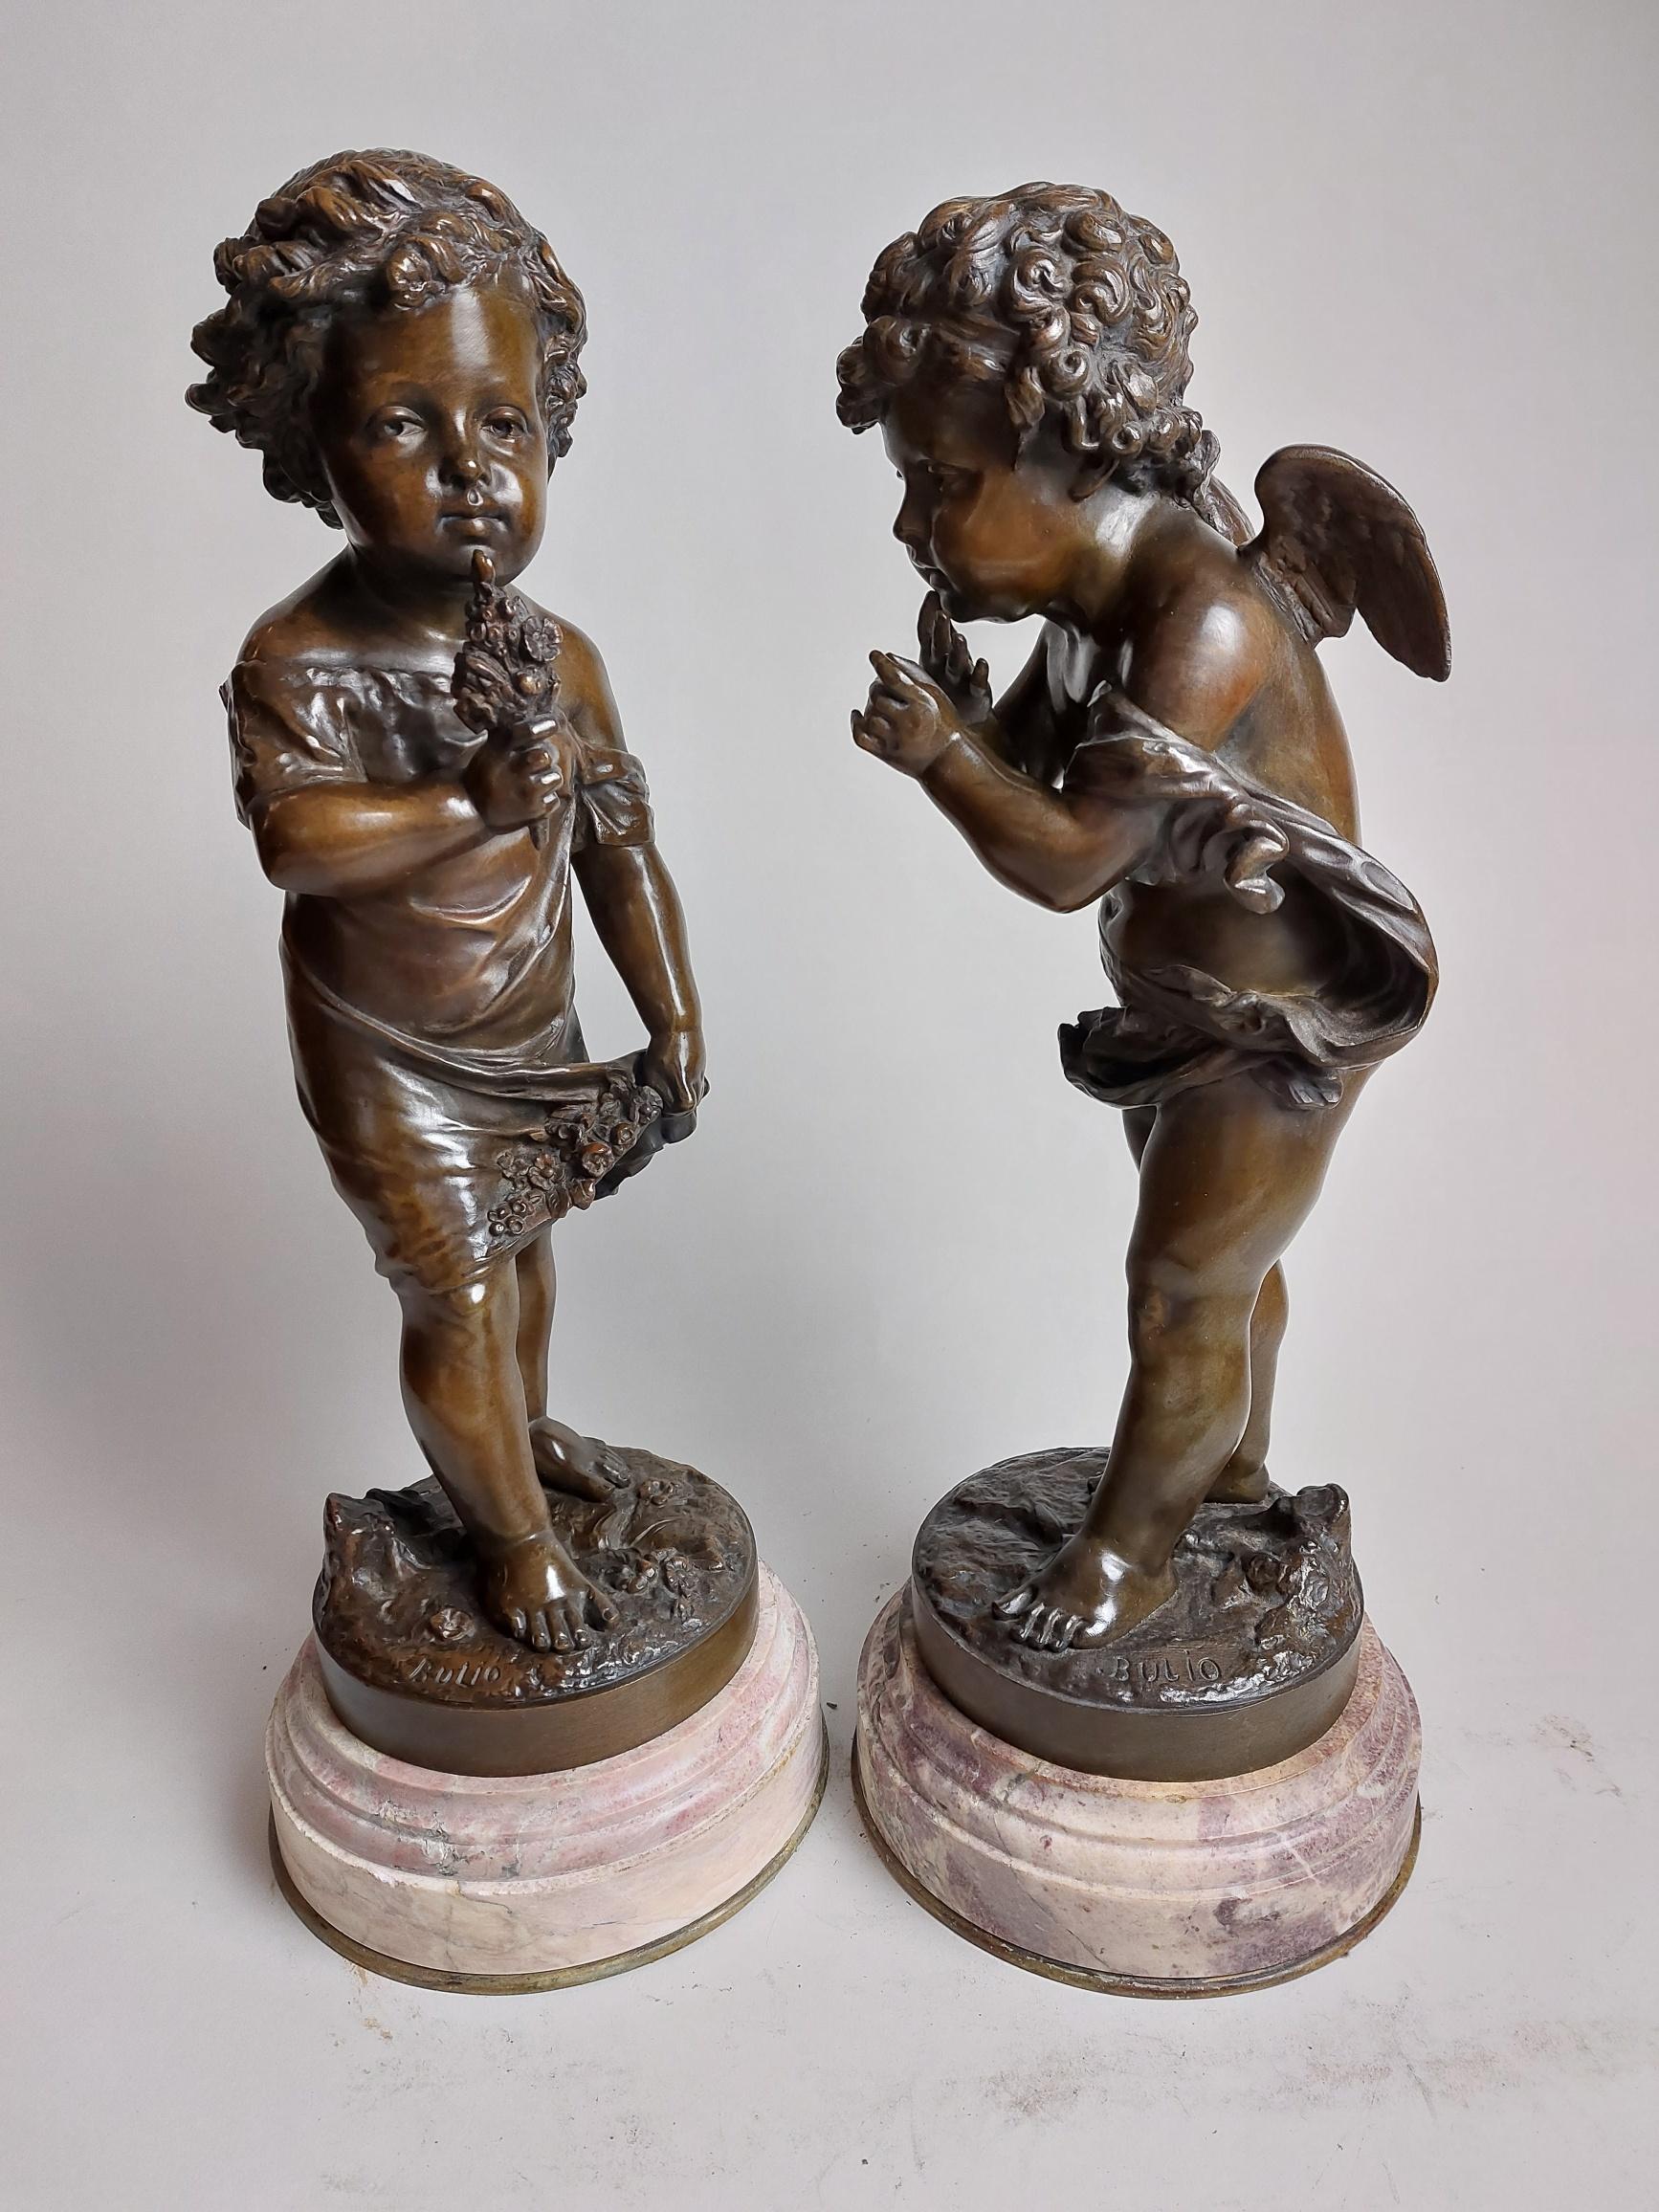 Baroque Revival Very Sweet Pair of 19th Century French Bronzes Depicting Cherubs Signed Bulio For Sale